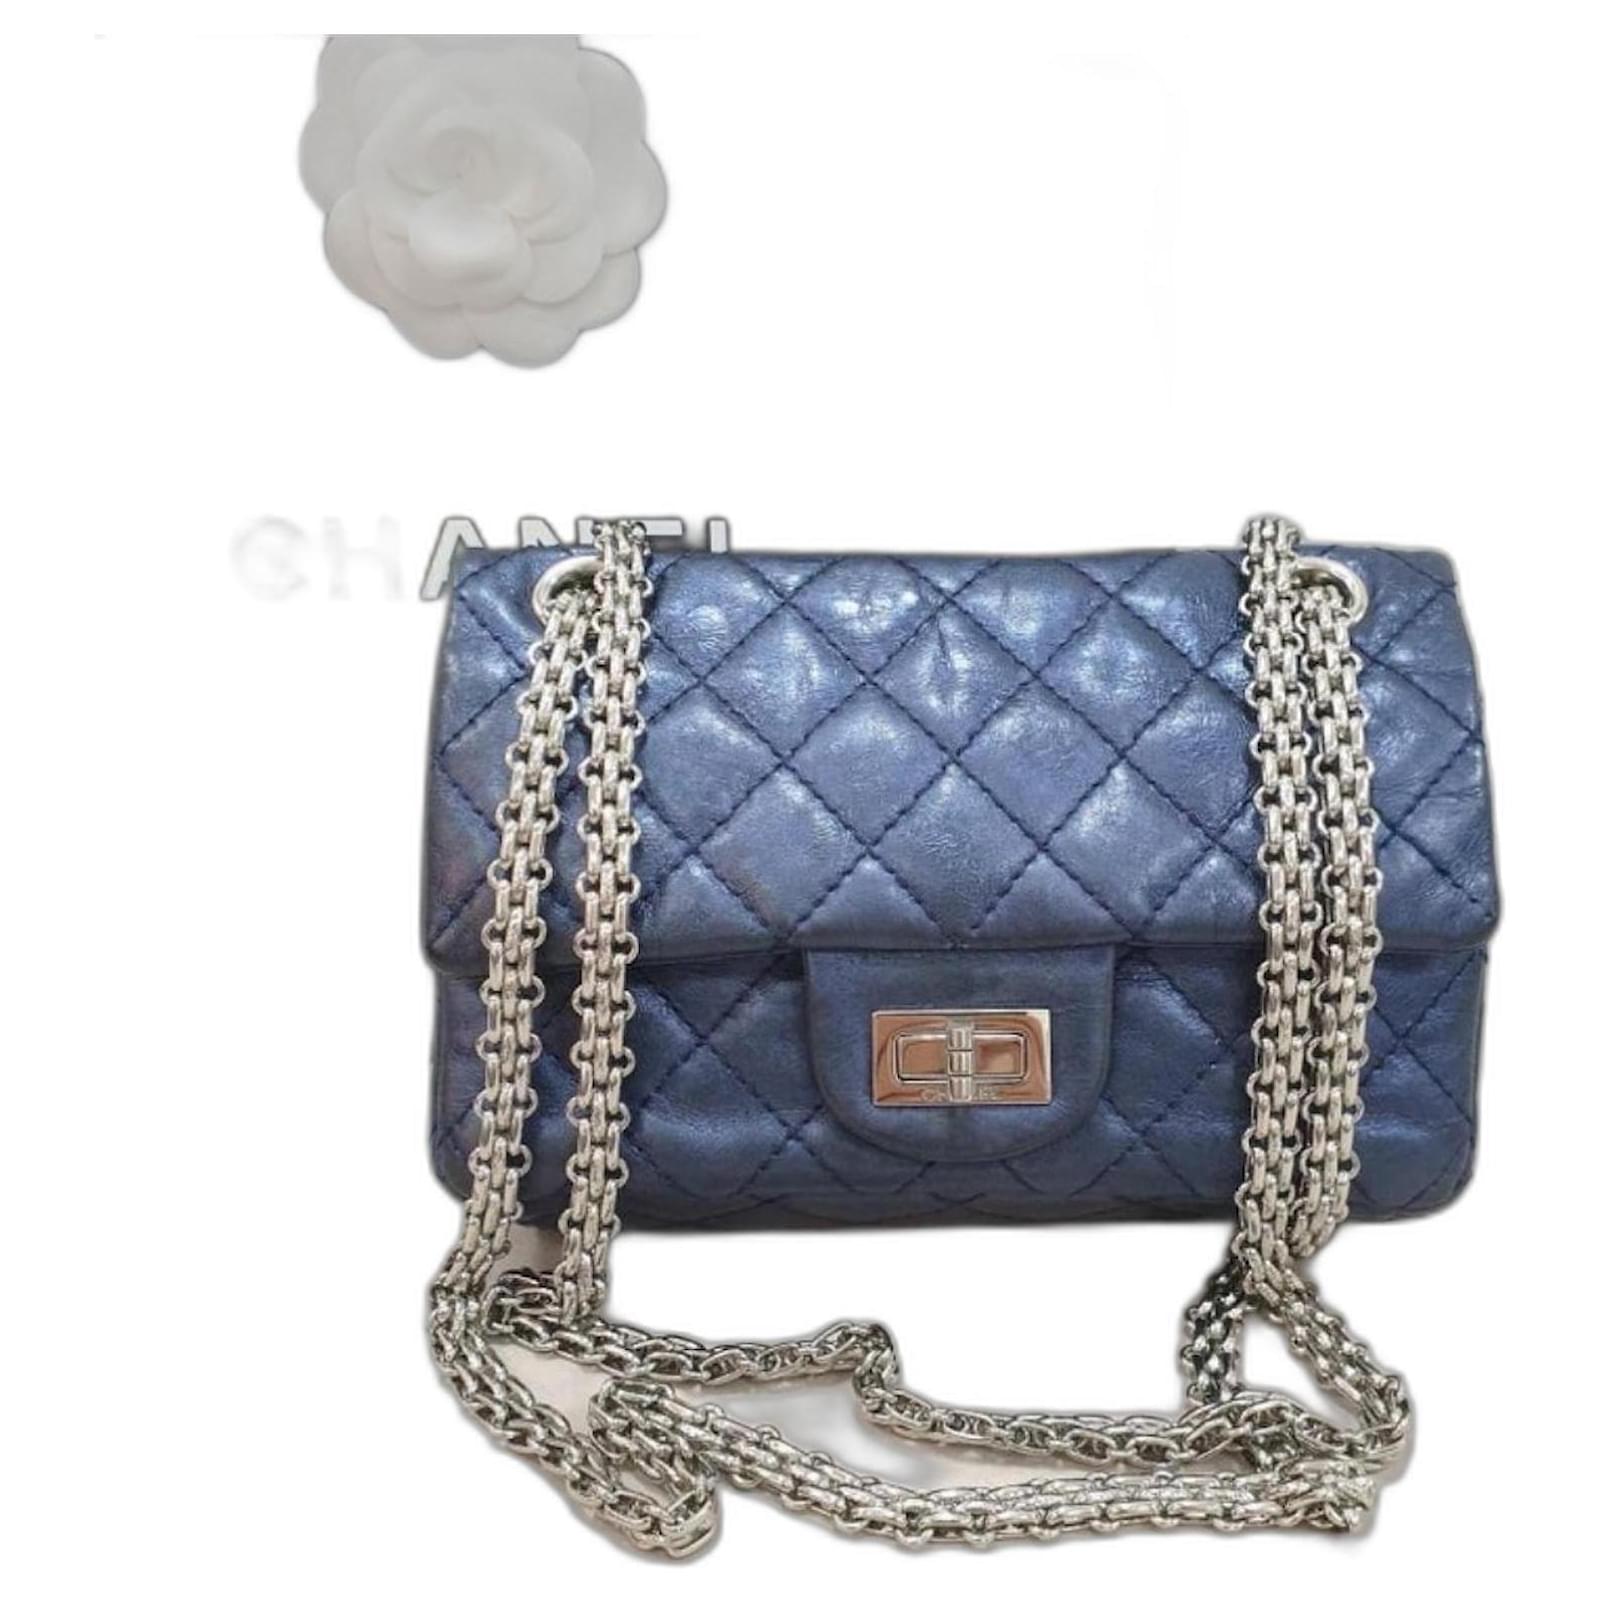 Chanel 2.55 Quilted Lambskin Medium Flap Bag Cuba Multicolor Silver Hardware